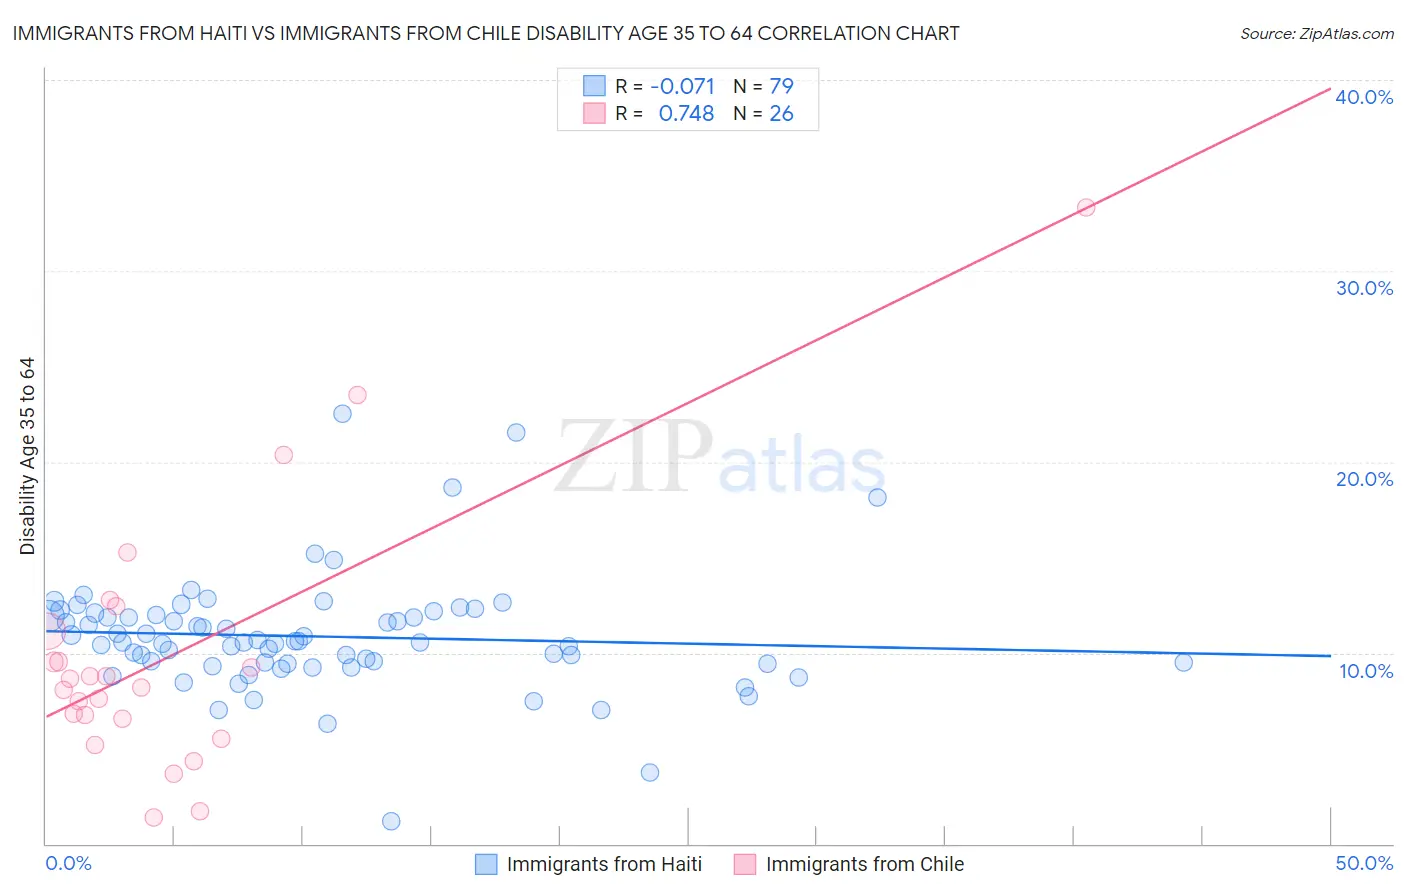 Immigrants from Haiti vs Immigrants from Chile Disability Age 35 to 64